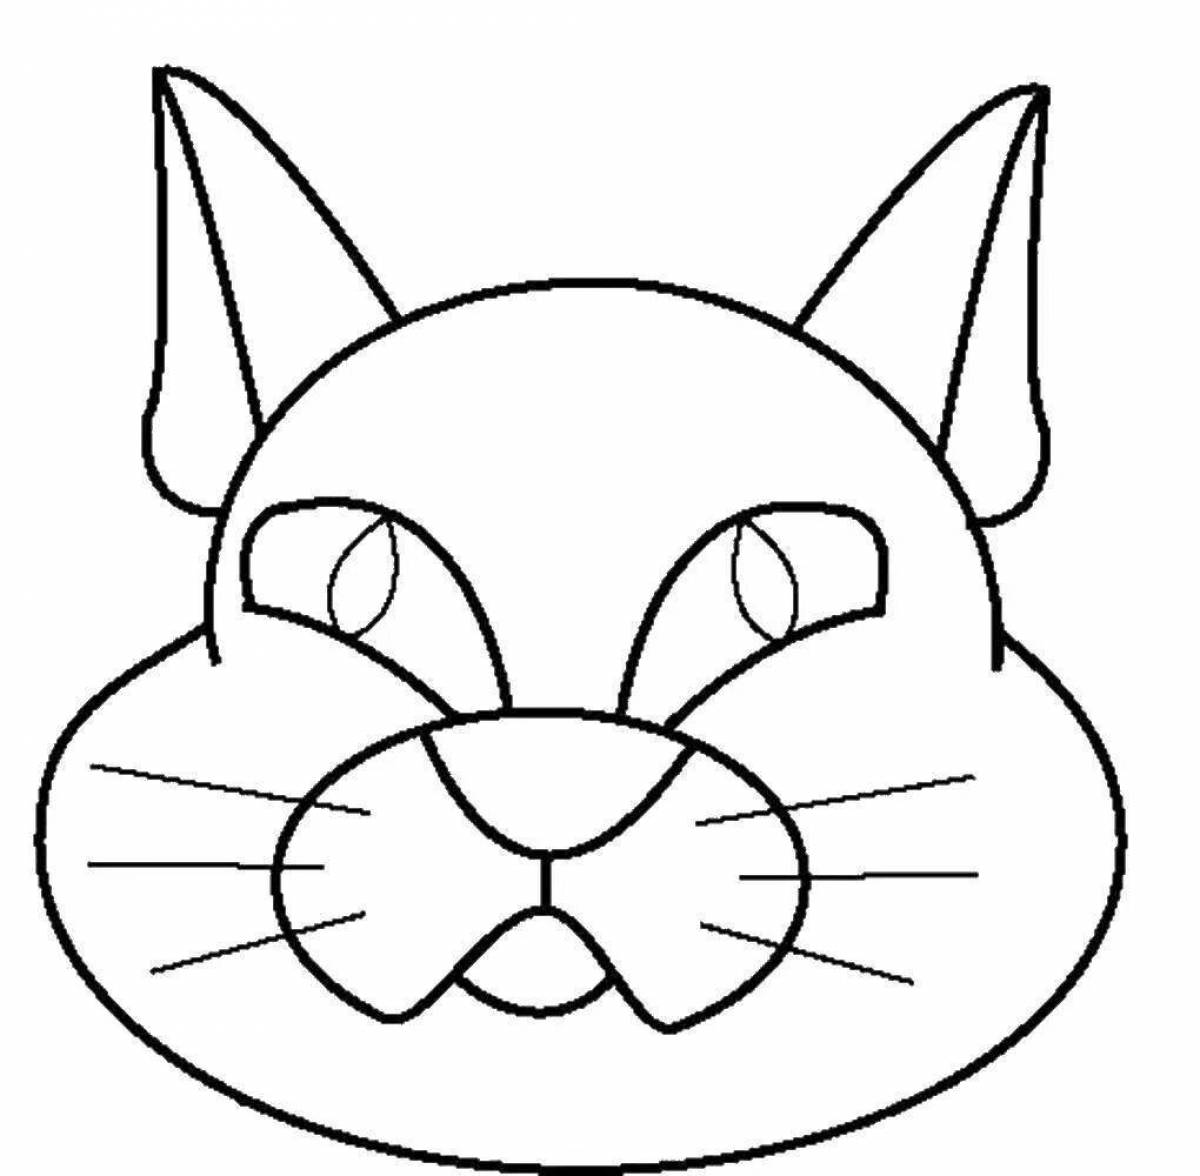 Coloring page nice cat mask